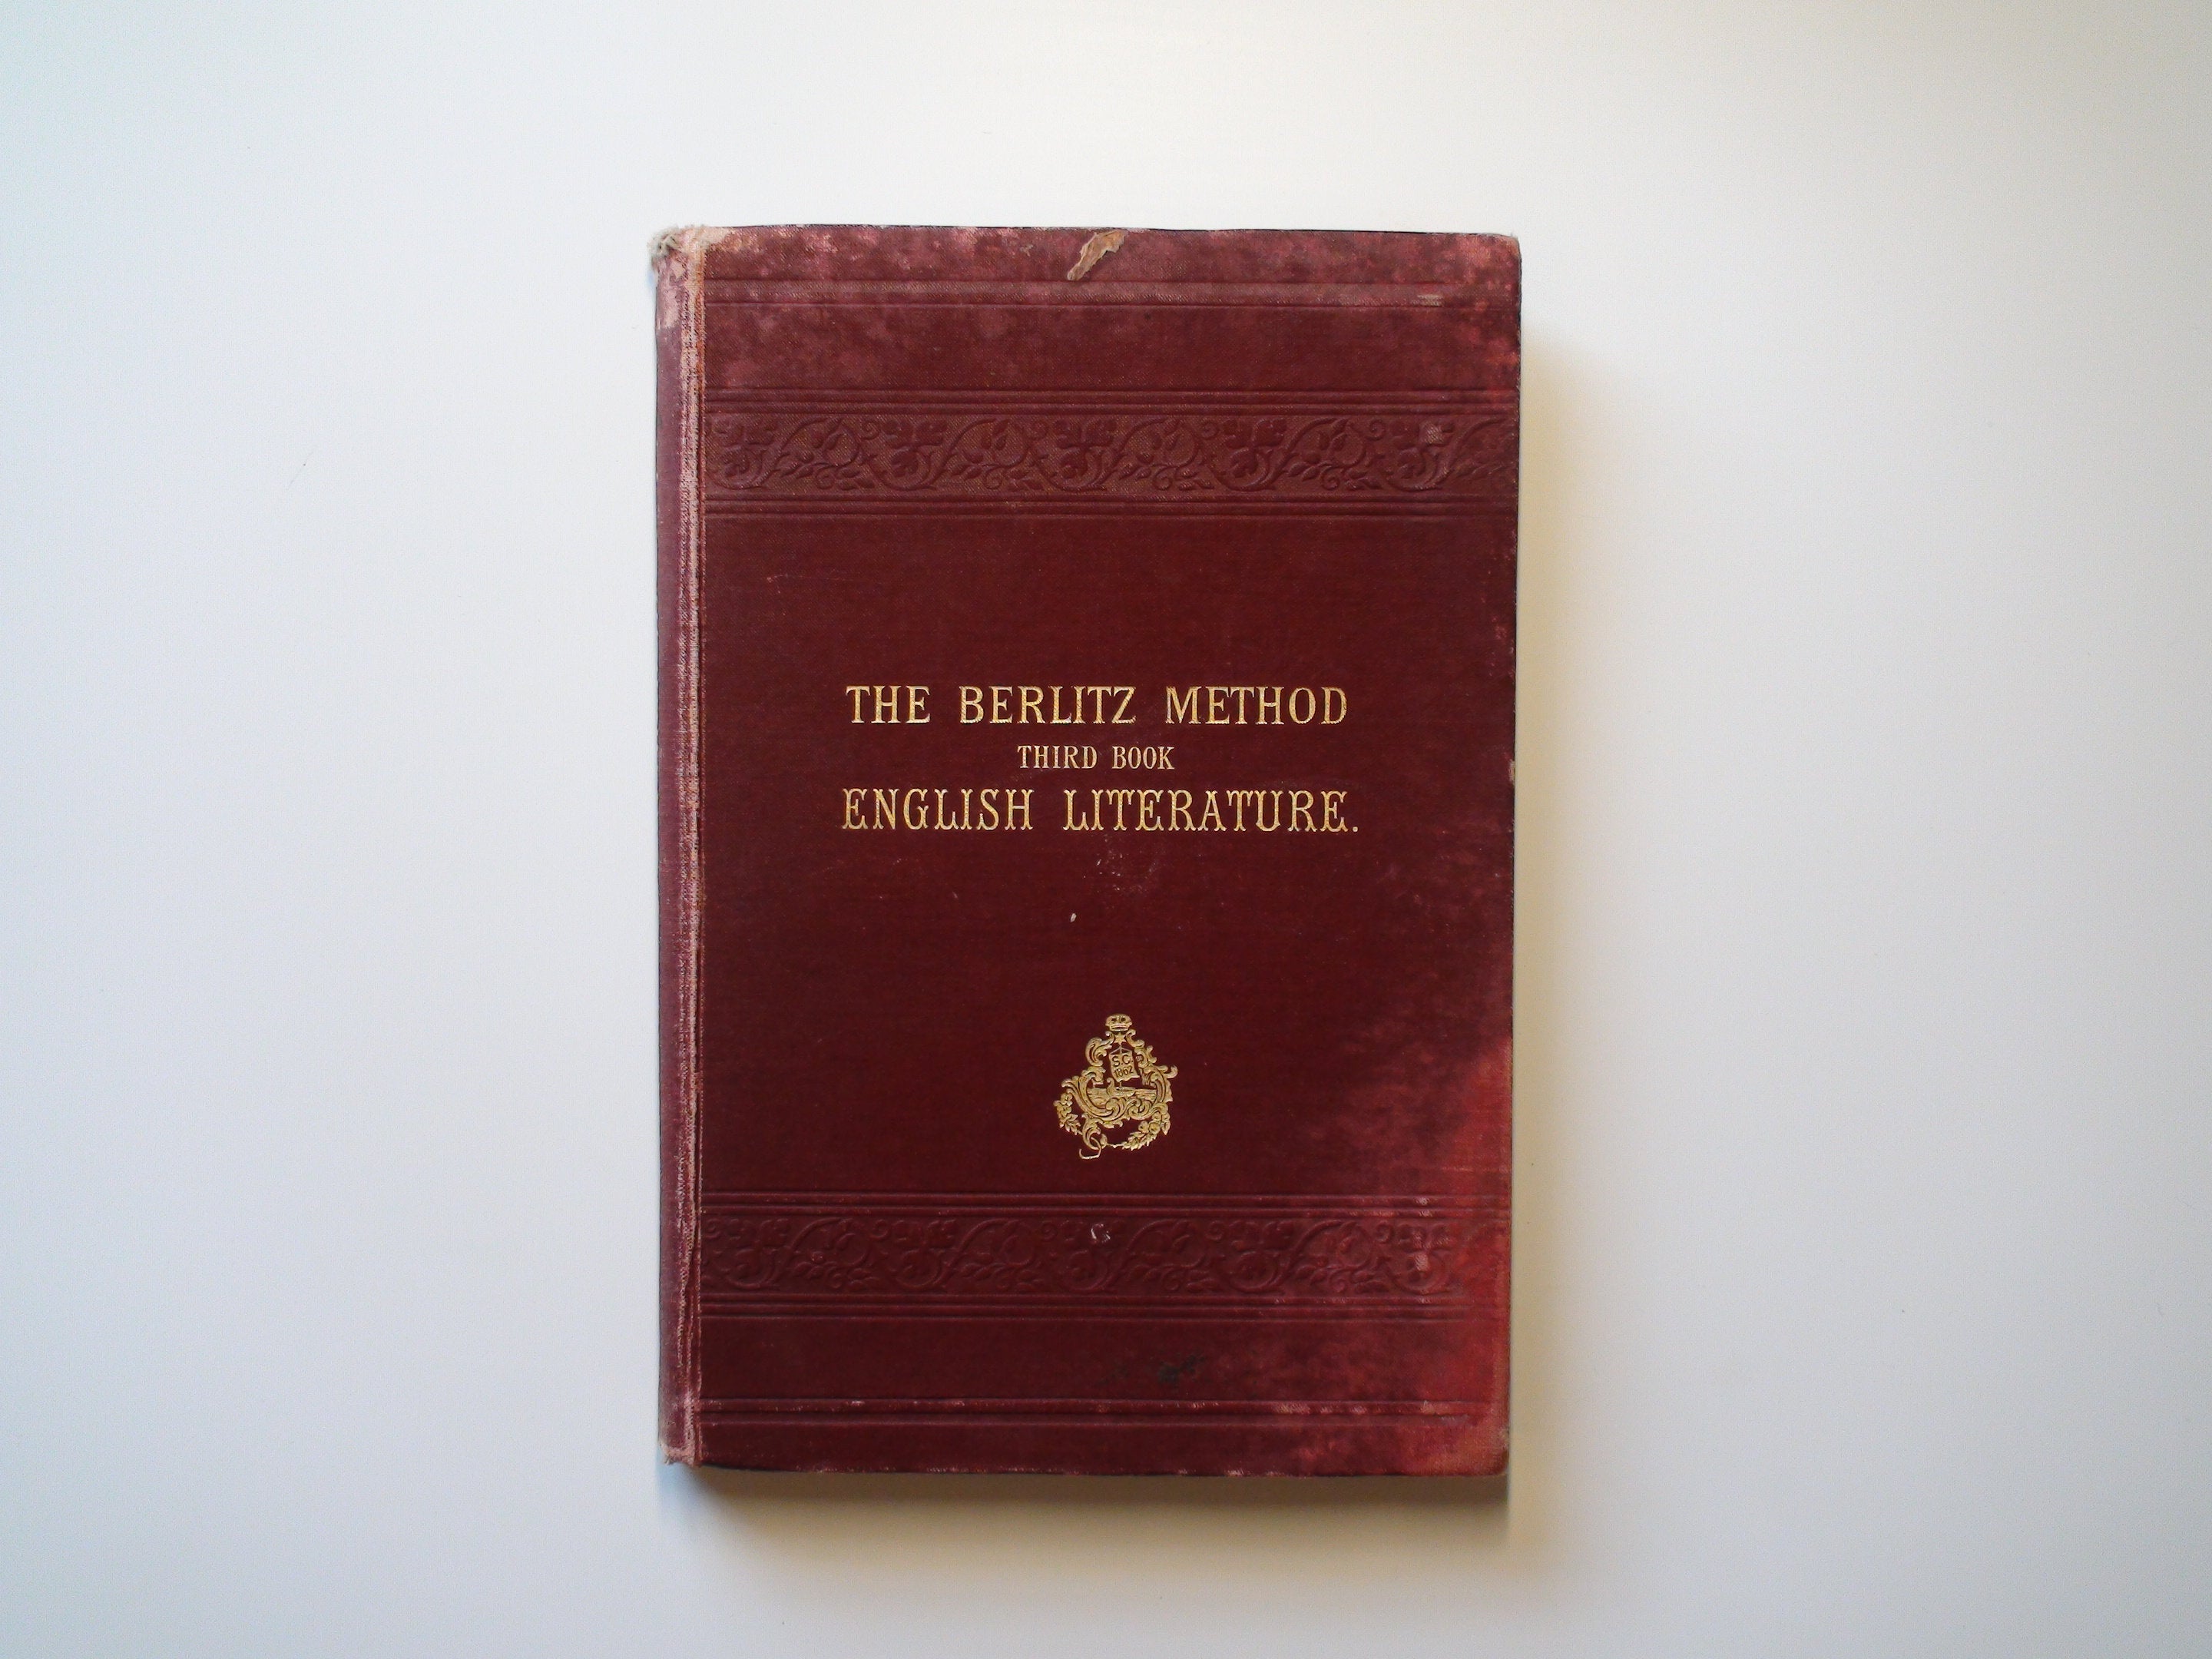 English Literature with Extracts and Exercises, M. D. Berlitz, 1902, 1st. Ed.